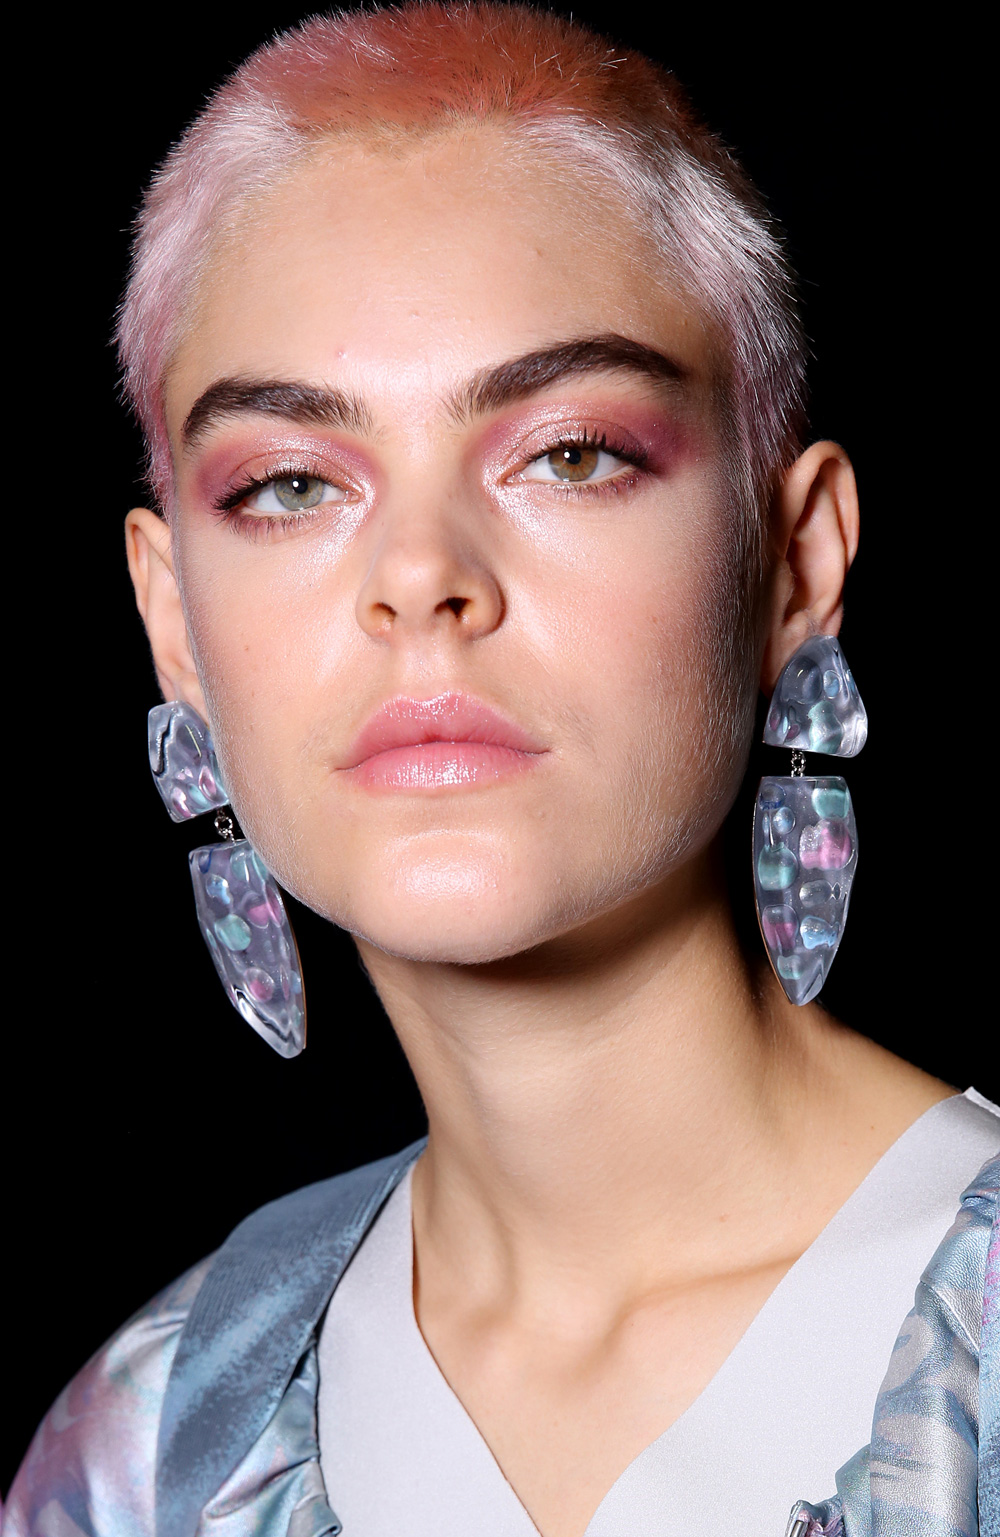 16 Top Make-Up Looks to Bookmark for Spring/Summer 2019